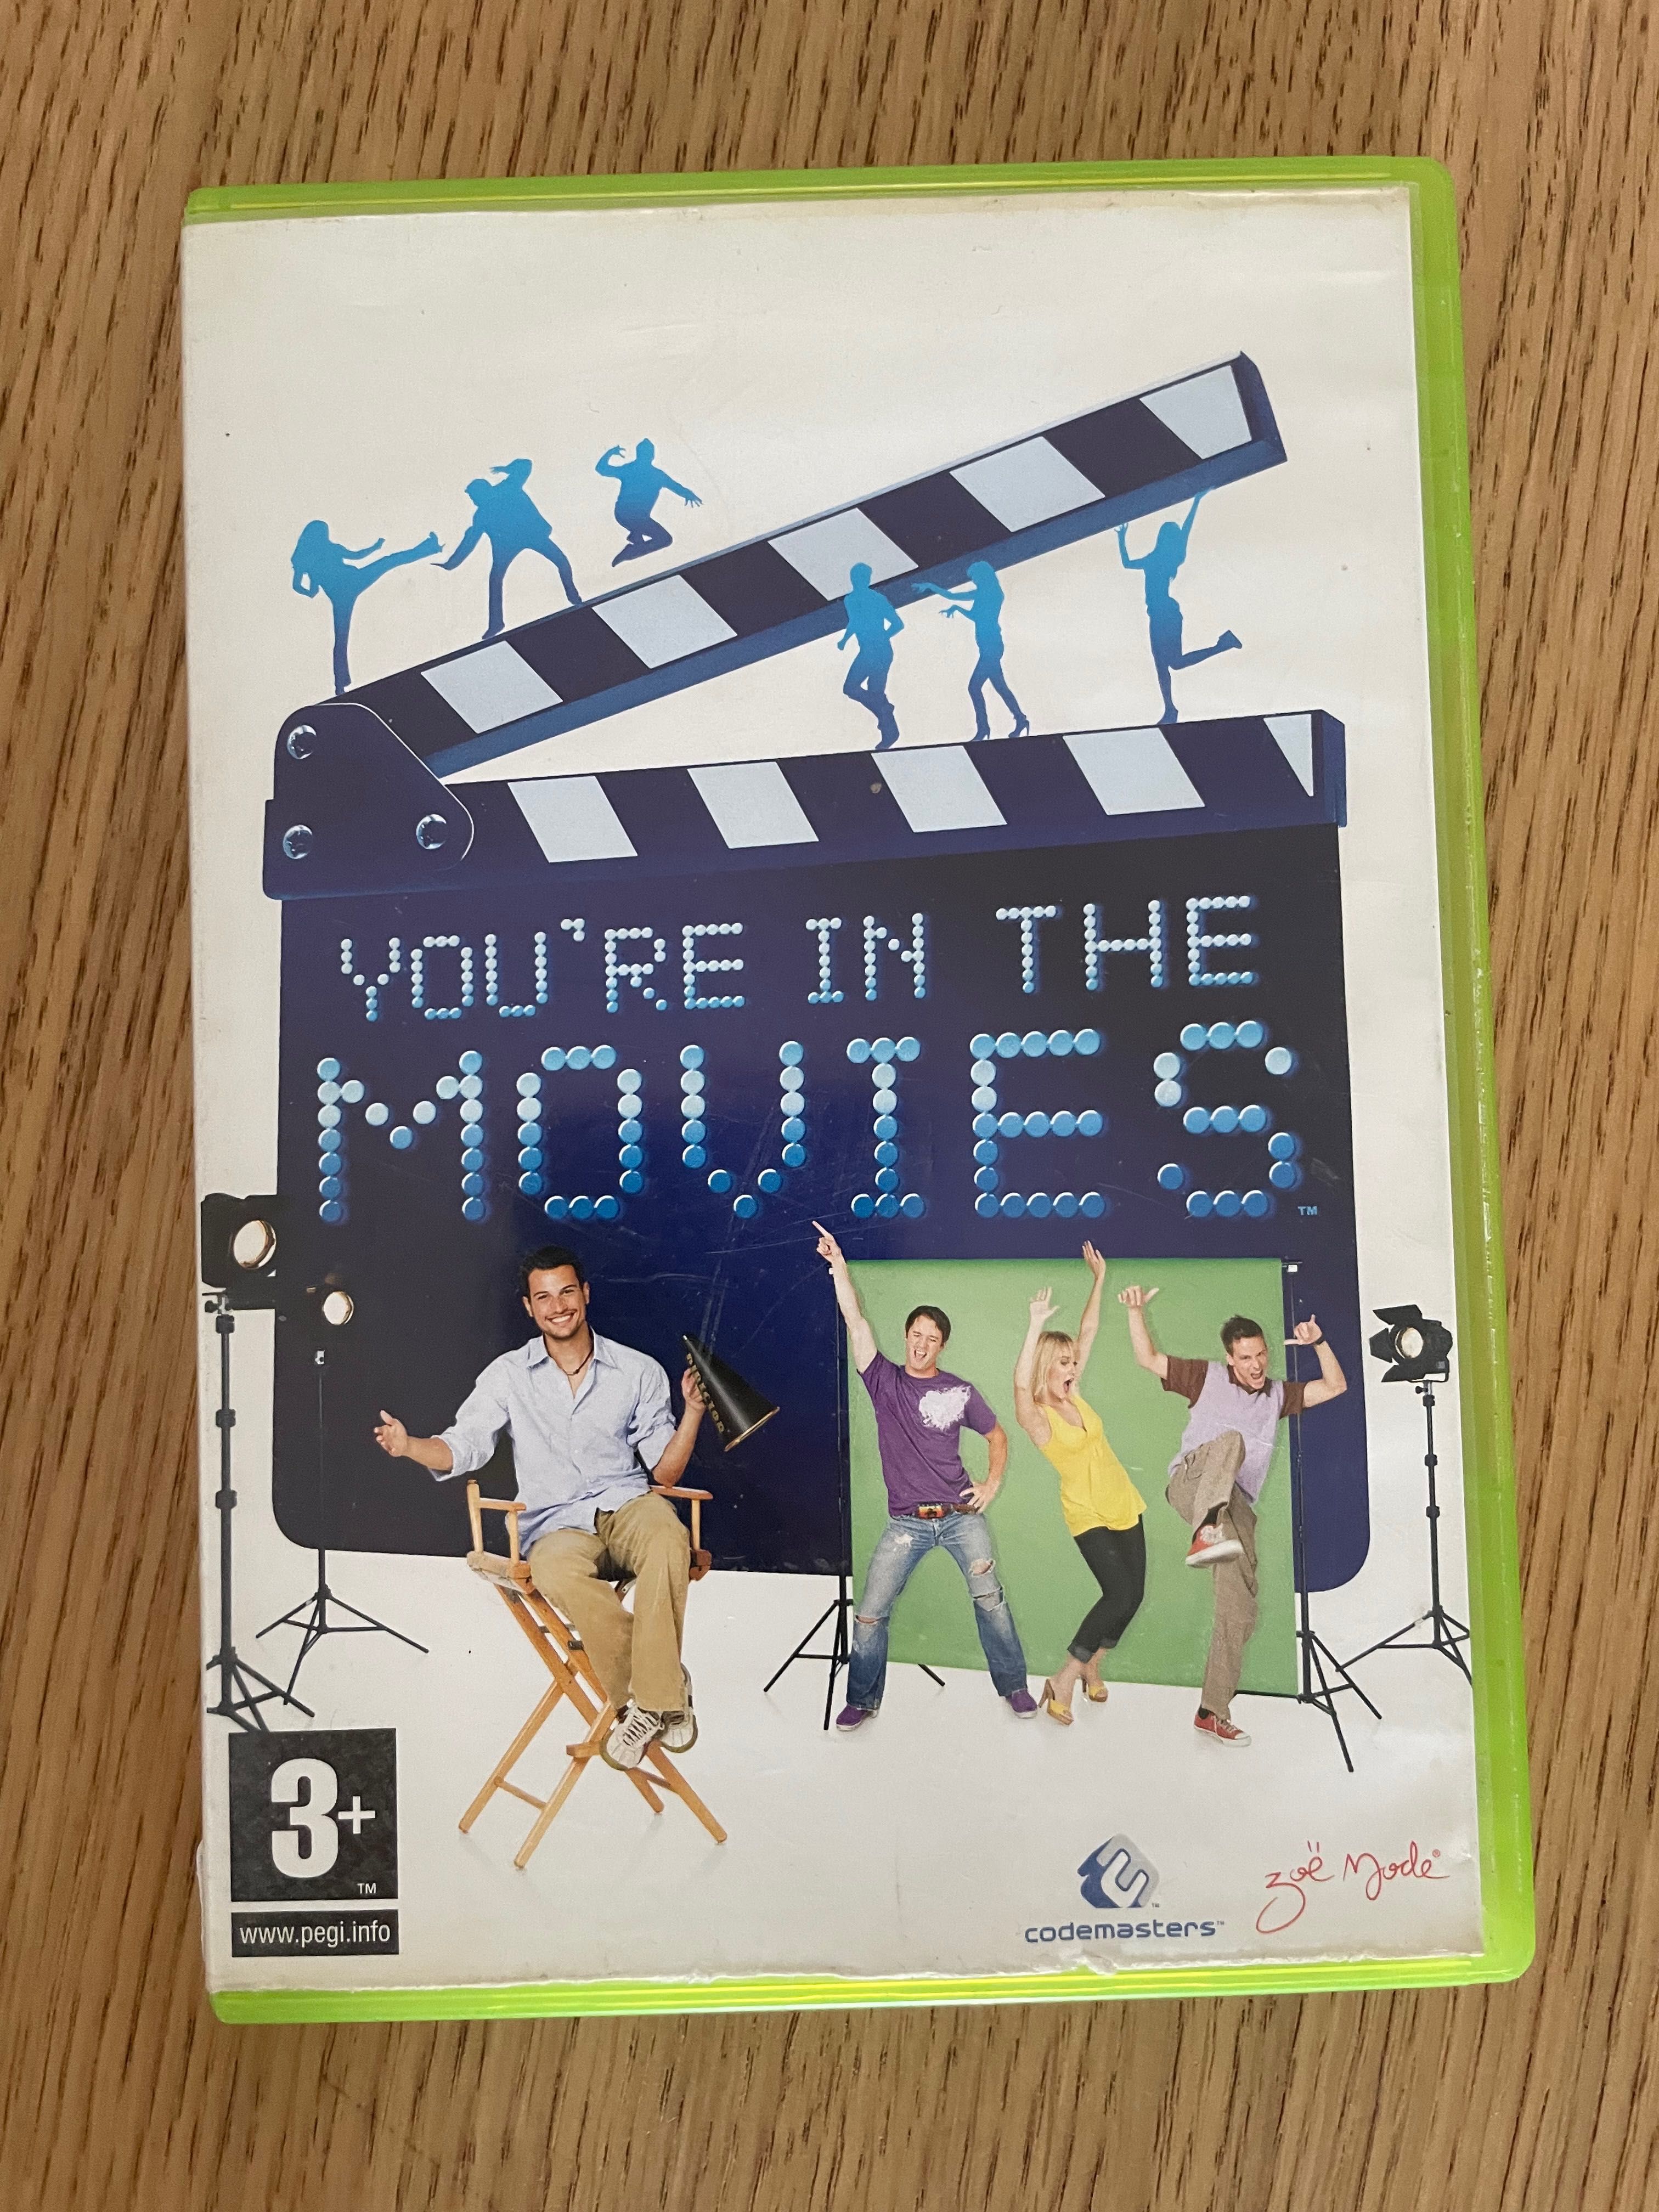 You are in the movies Xbox 360